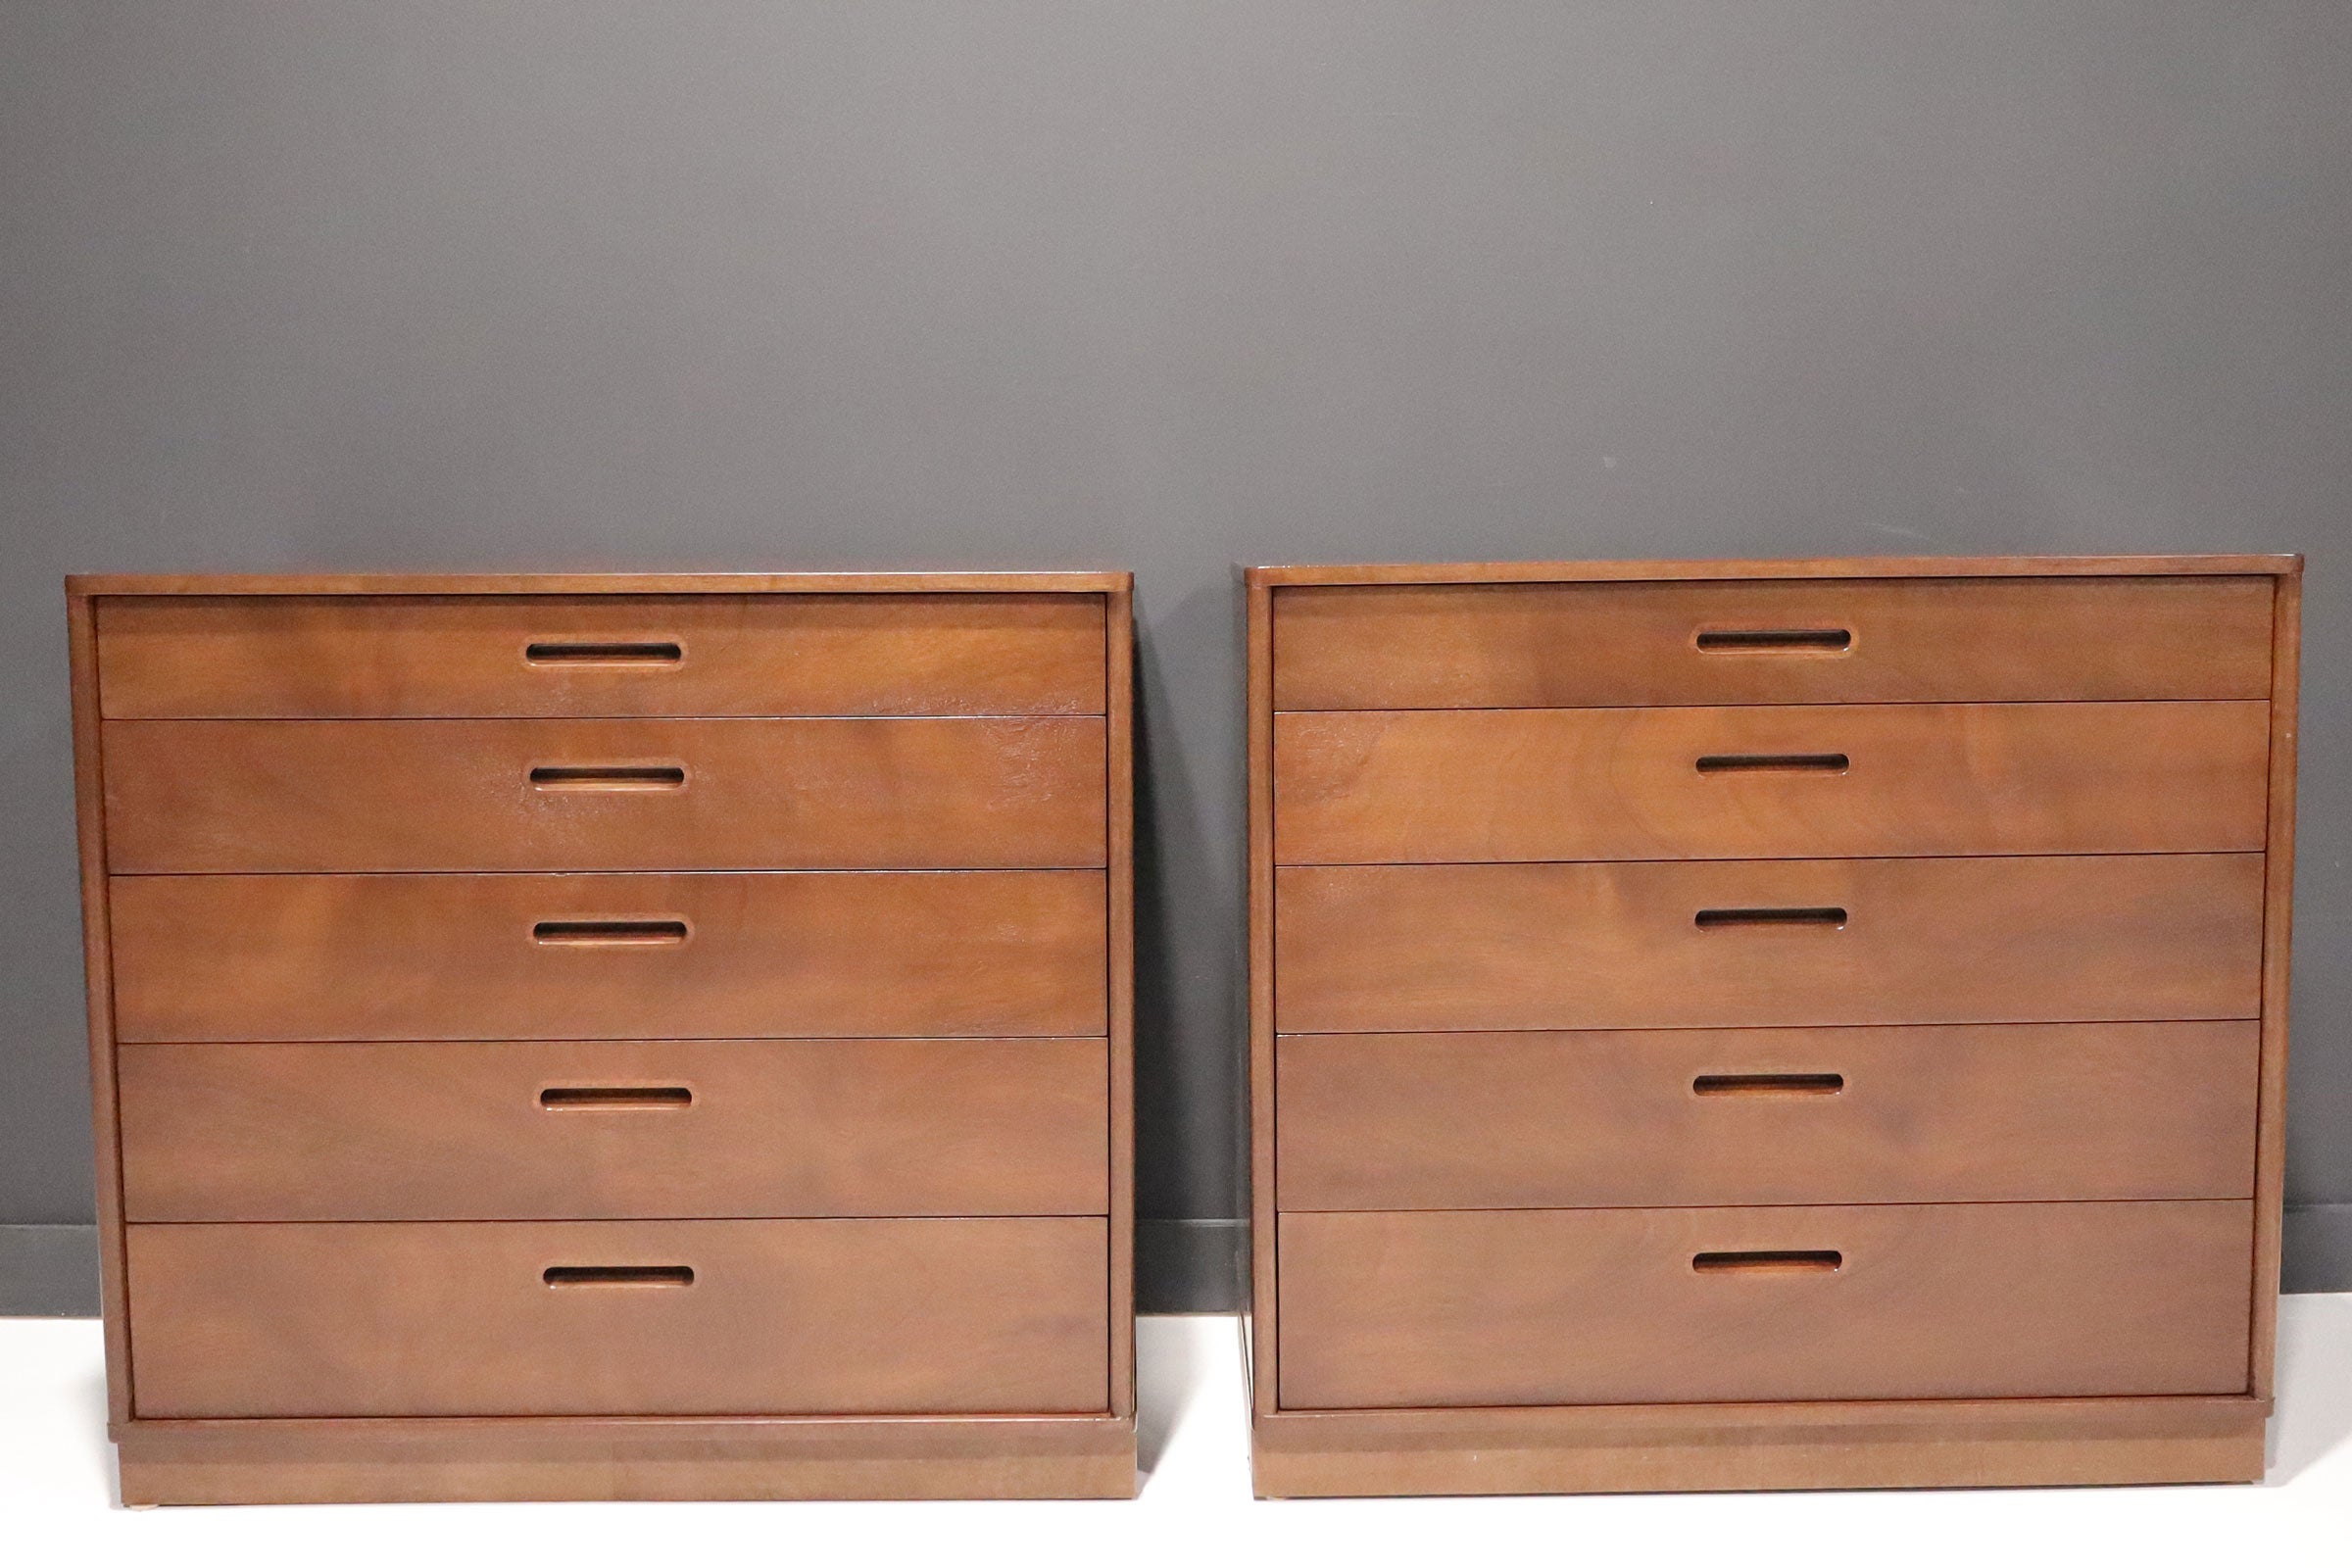 Beautifully crafted chest of drawers by Edward Wormley for Dunbar. These are mahogany and feature 5 drawers, 2 smaller than the other three. Make great nightstands or banking an entrance or fireplace.